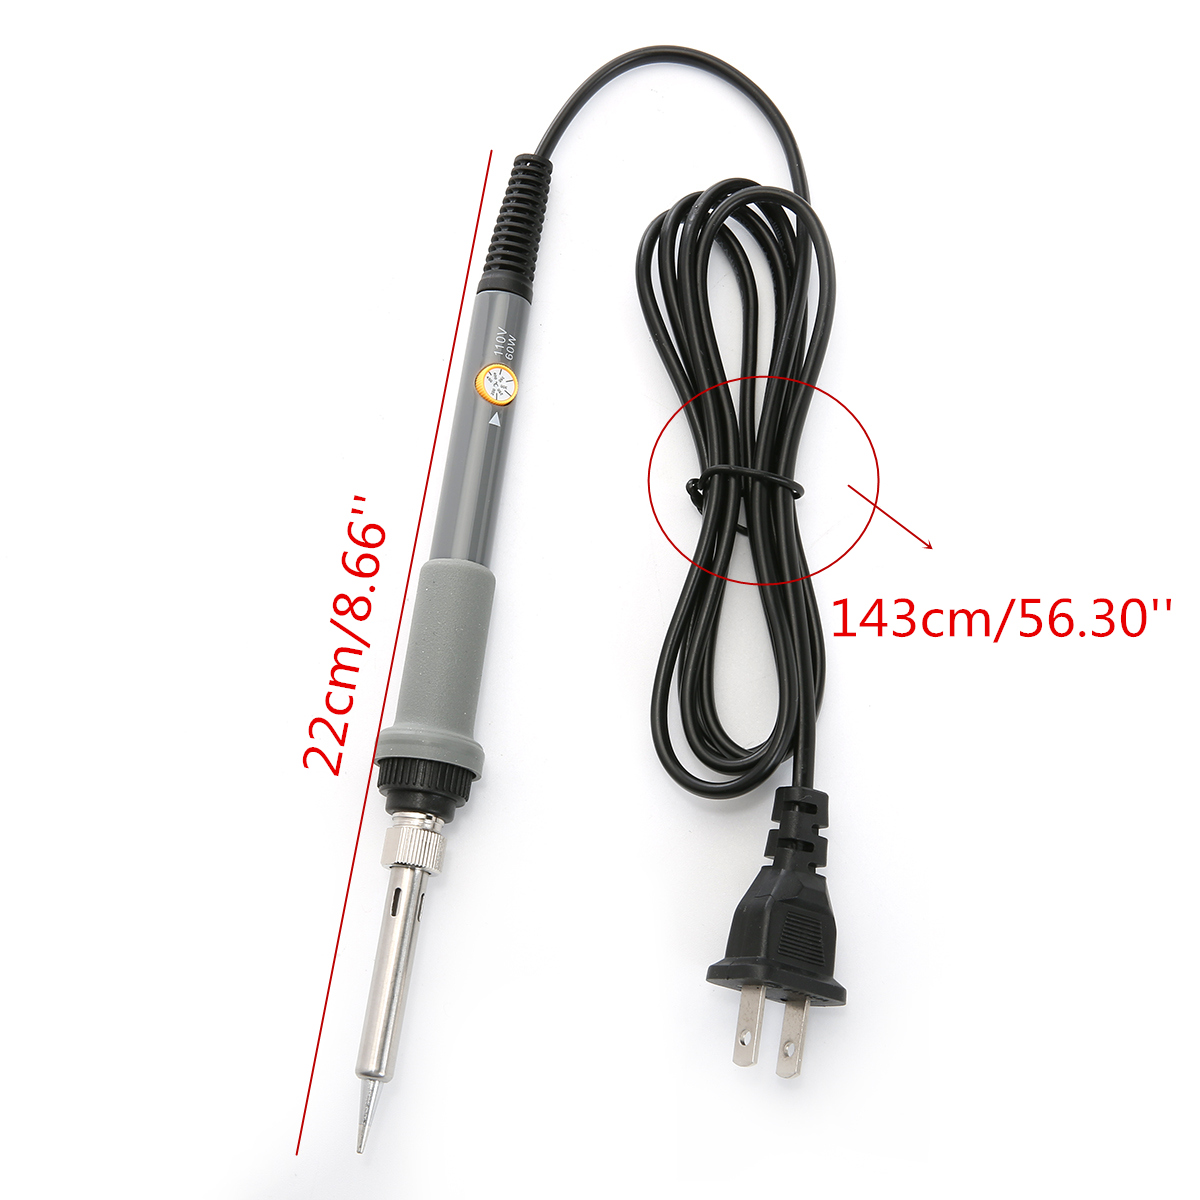 110V-Adjustable-Electric-Temperature-Welding-Solder-Iron-Tool-Solder-with-5Pcs-Tips-1299696-9